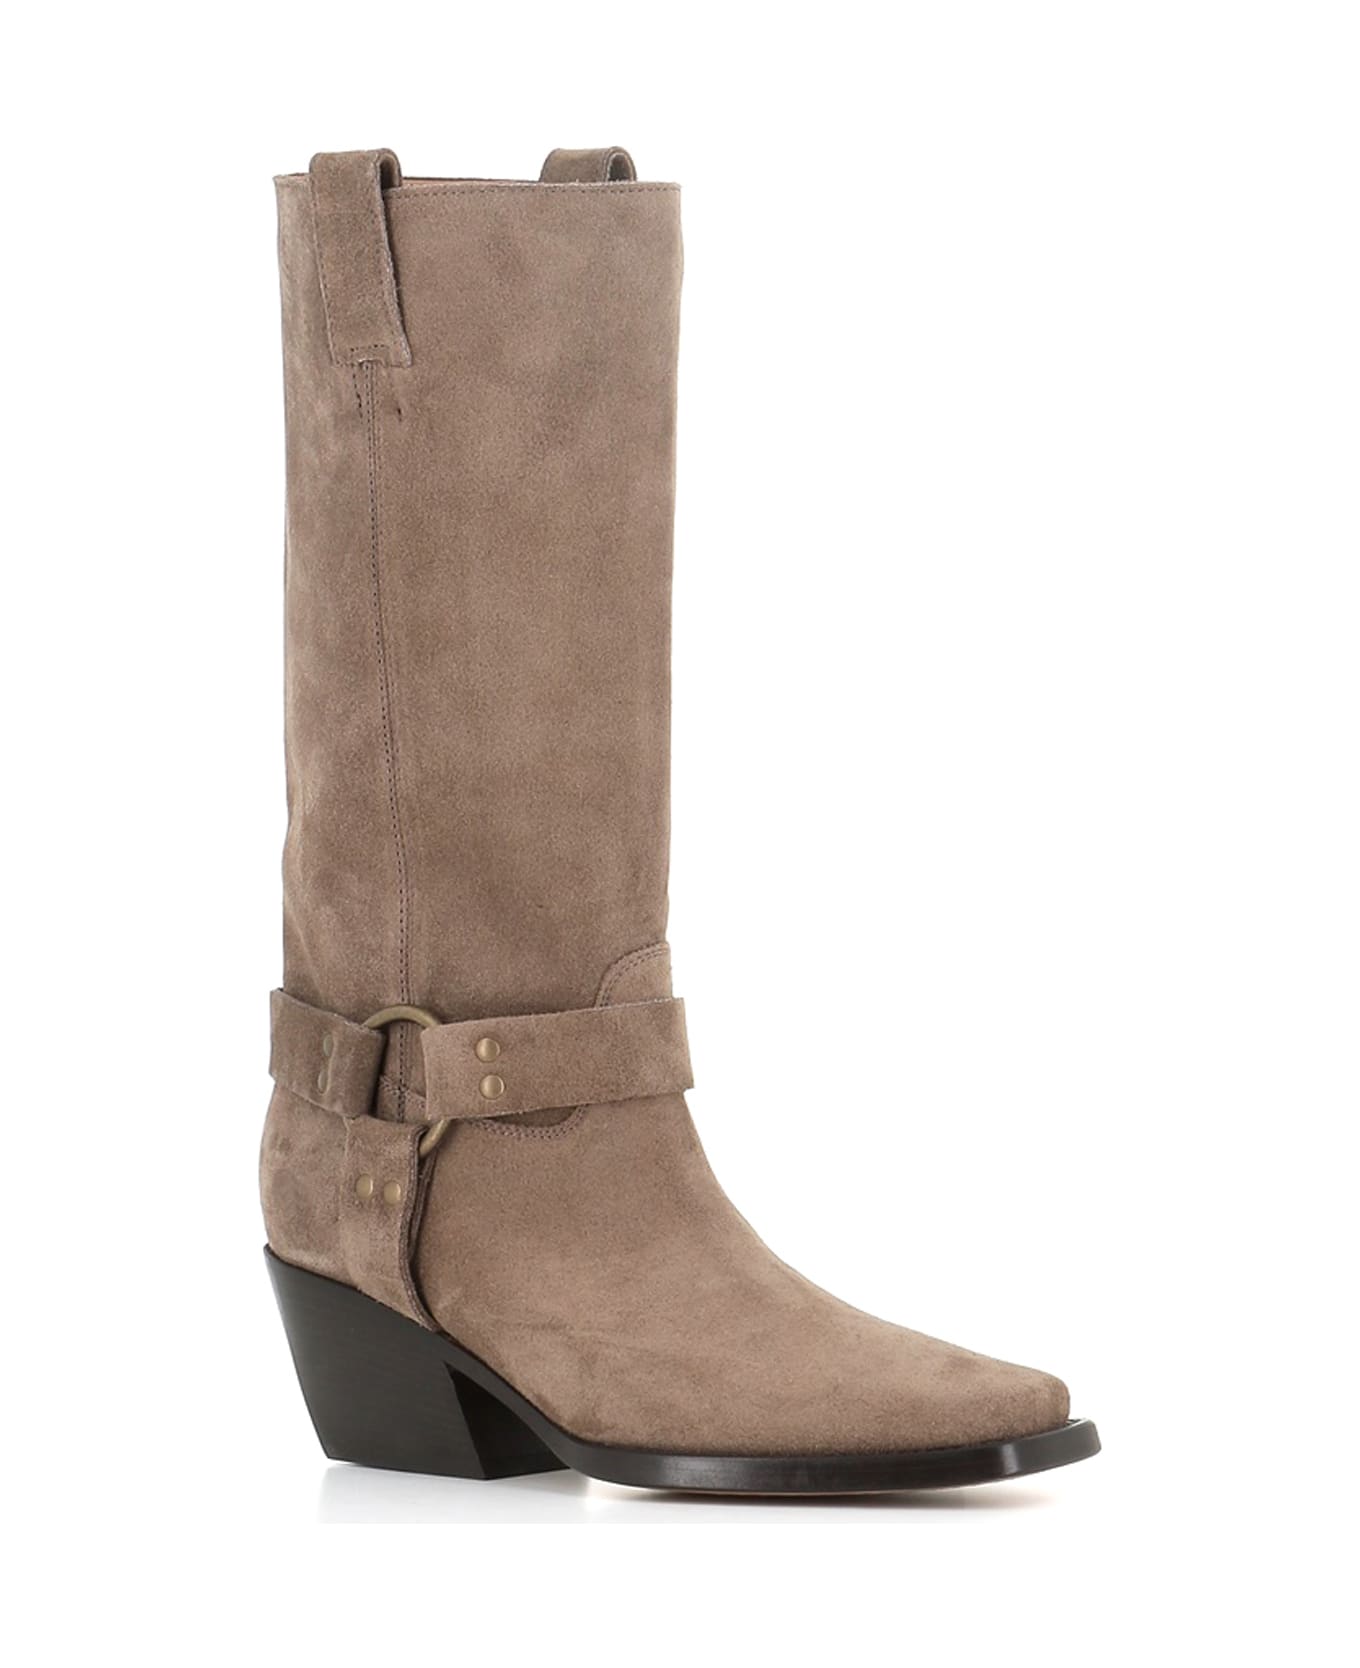 Paola D'Arcano Boot 4711 - Taupe ブーツ